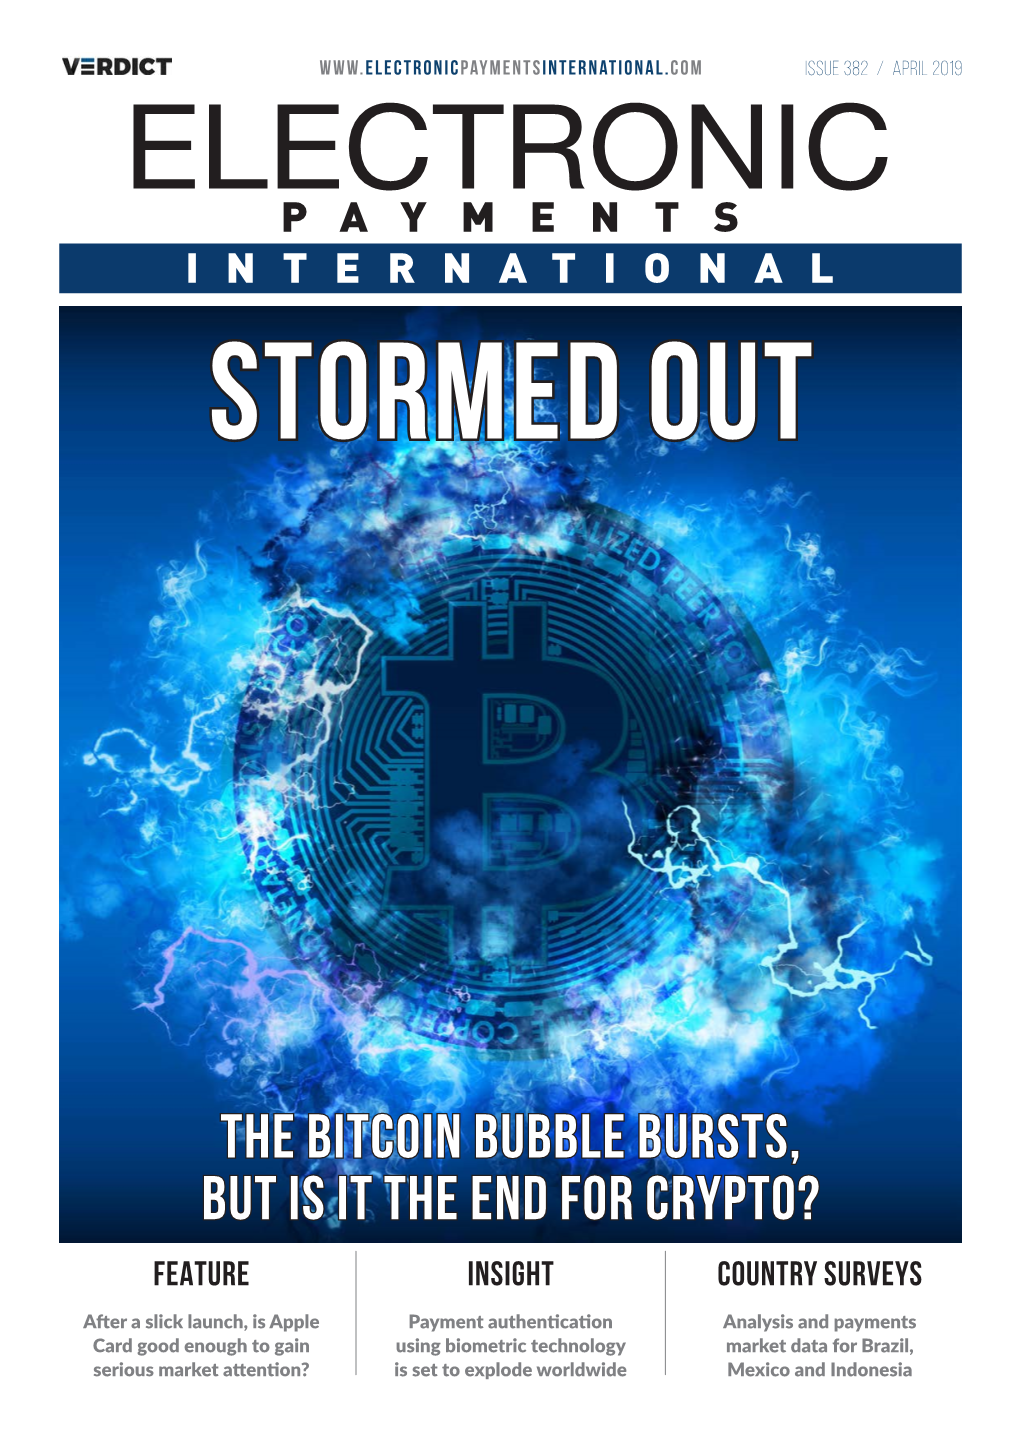 The Bitcoin Bubble Bursts, but Is It the End for Crypto? Feature Insight Country Surveys